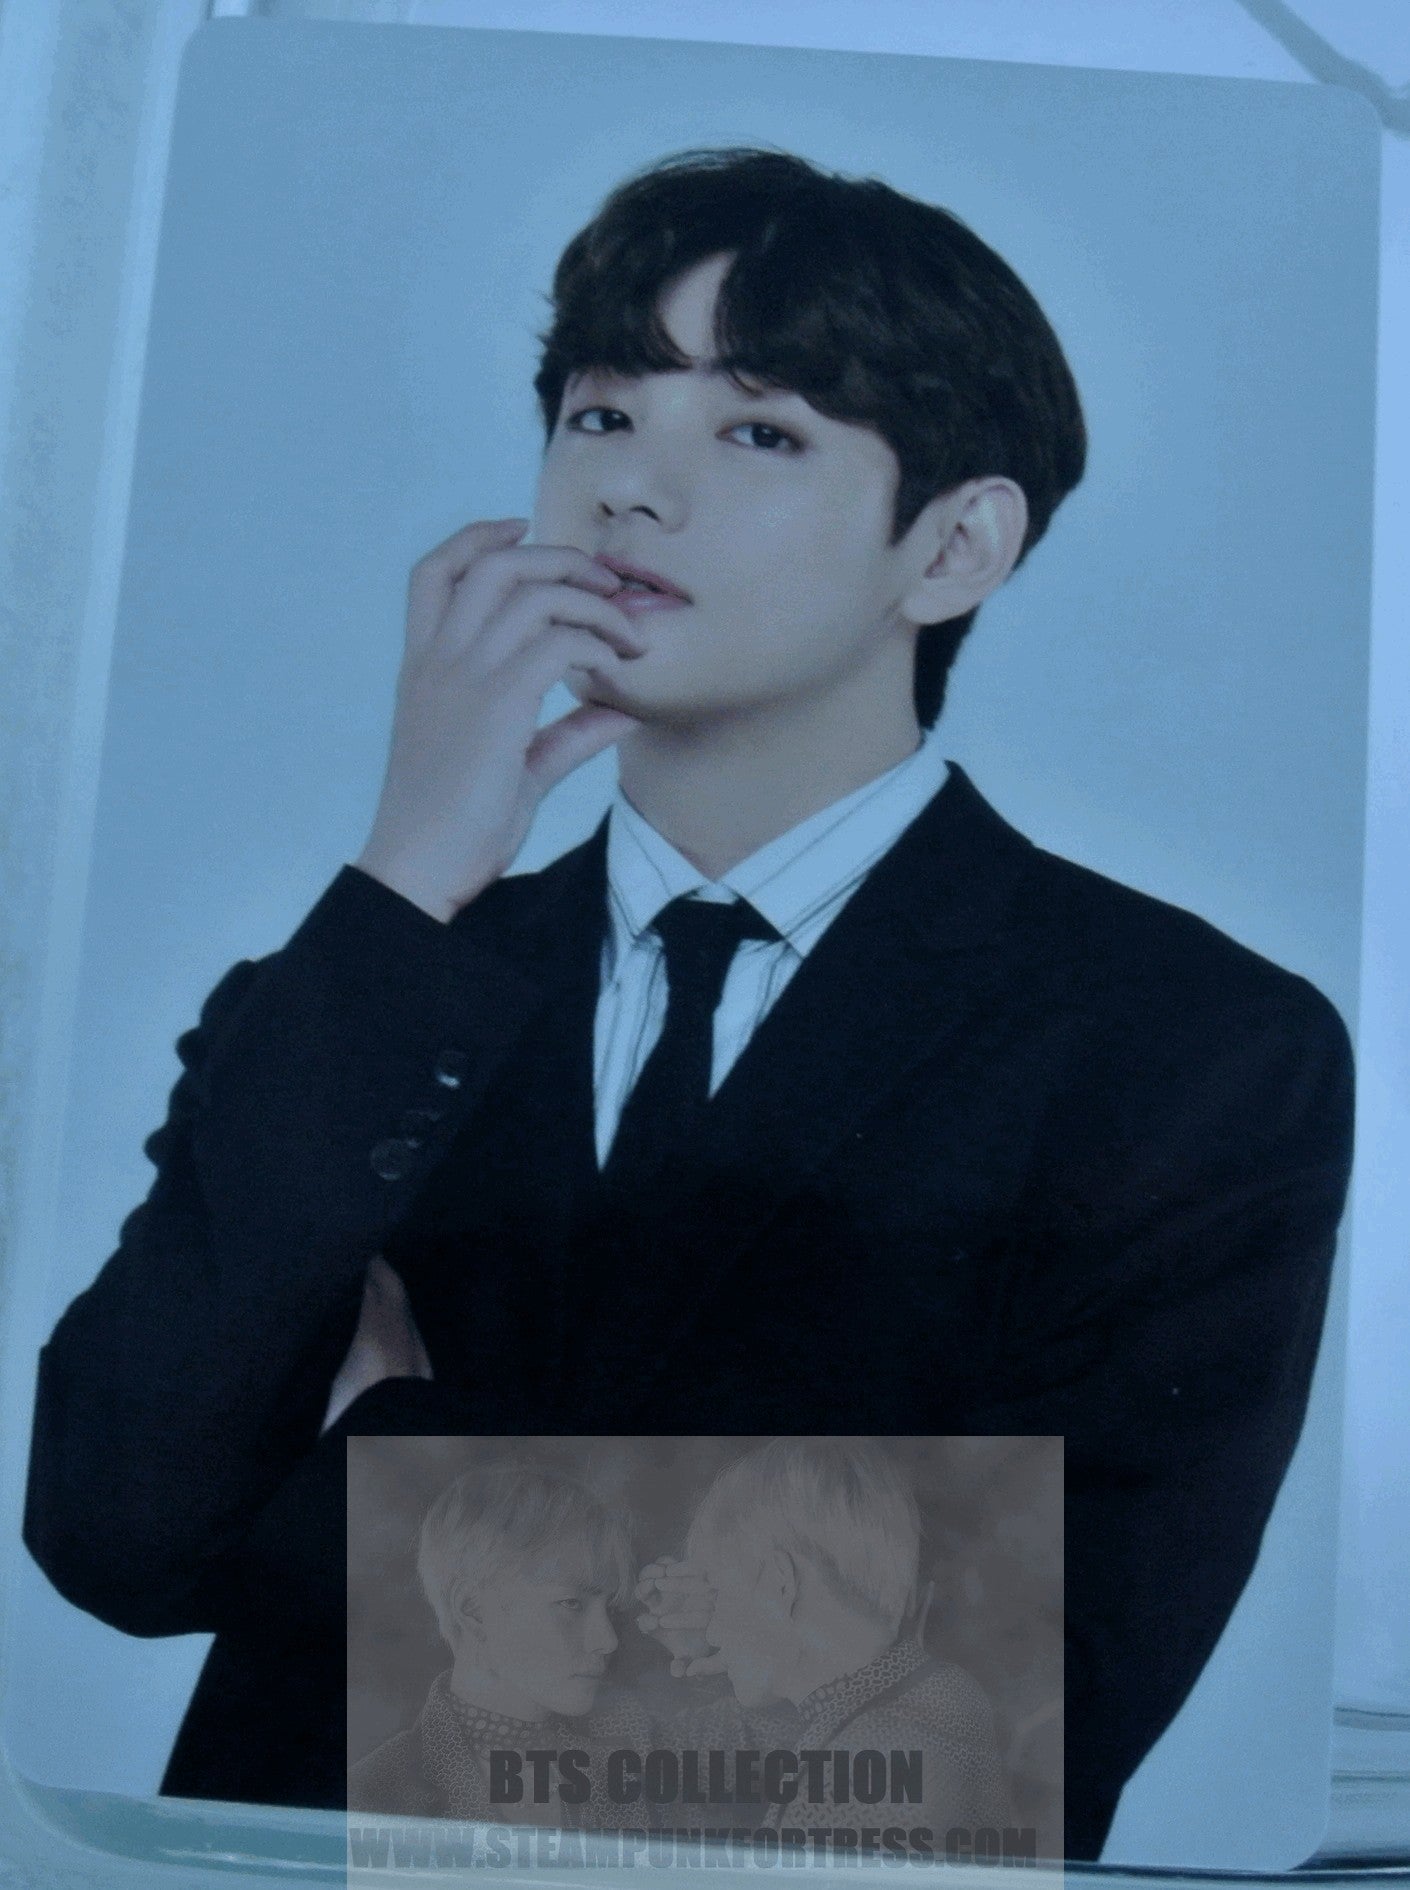 BTS V KIM TAEHYUNG TAE-HYUNG PTD 2021 PERMISSION TO DANCE ON STAGE #8 OF 8 PHOTOCARD PHOTO CARD NEW OFFICIAL MERCHANDISE